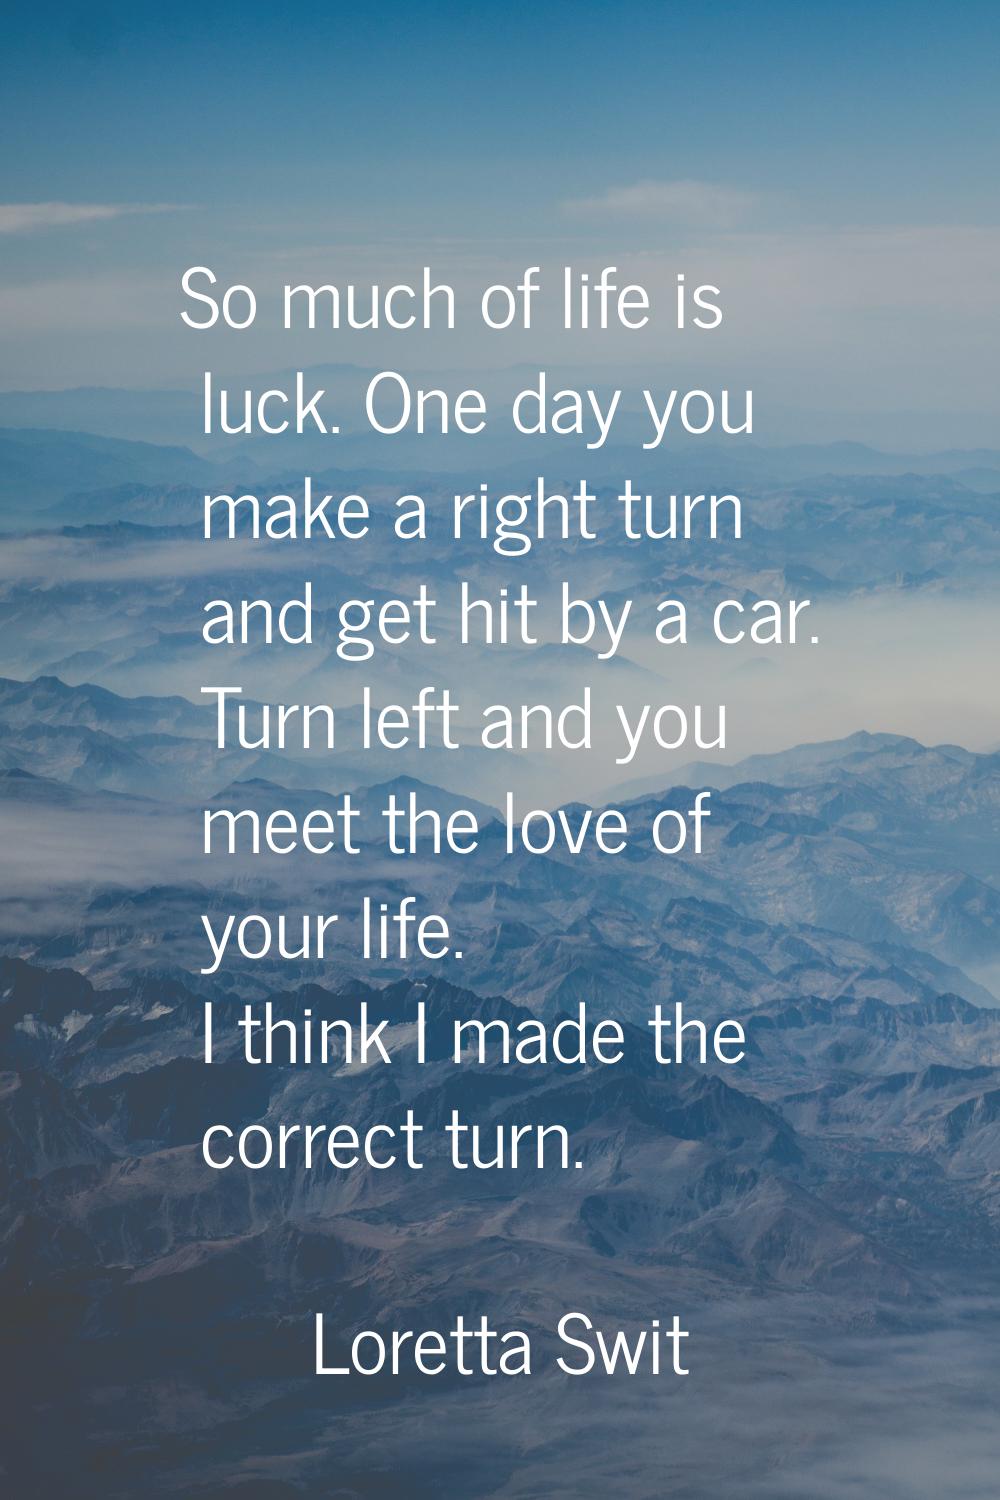 So much of life is luck. One day you make a right turn and get hit by a car. Turn left and you meet